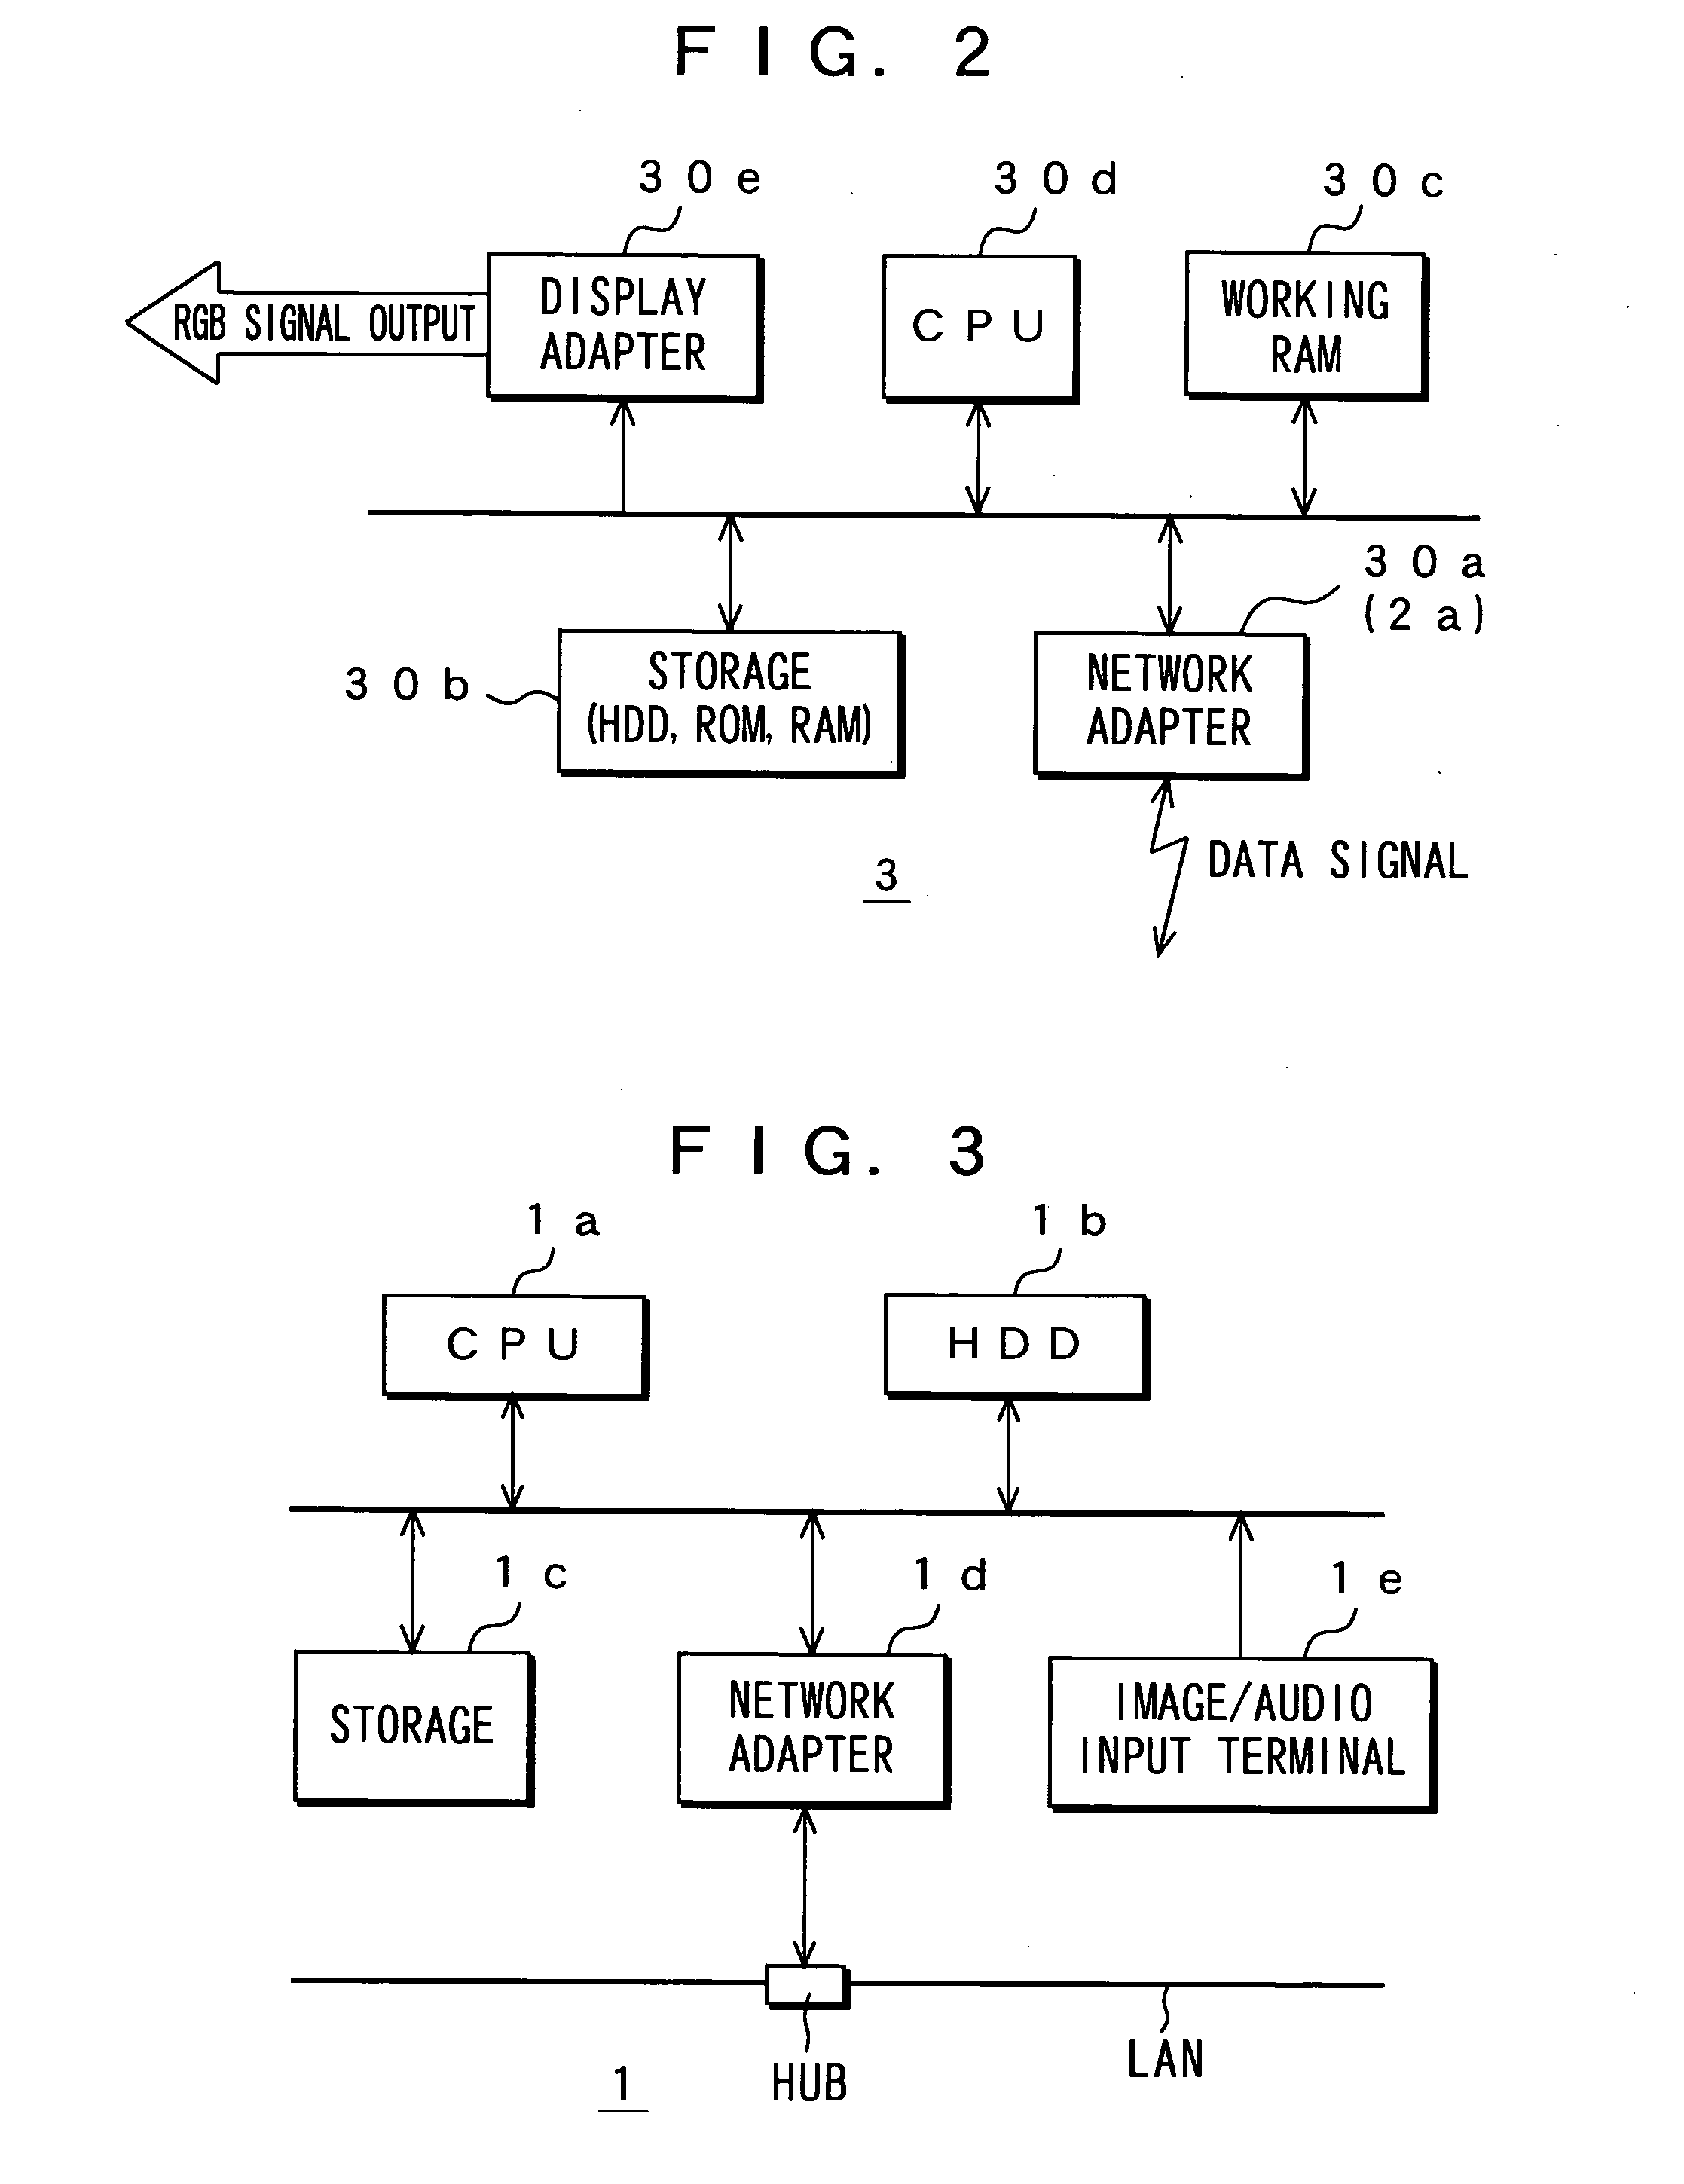 Network information processing system and information processing method